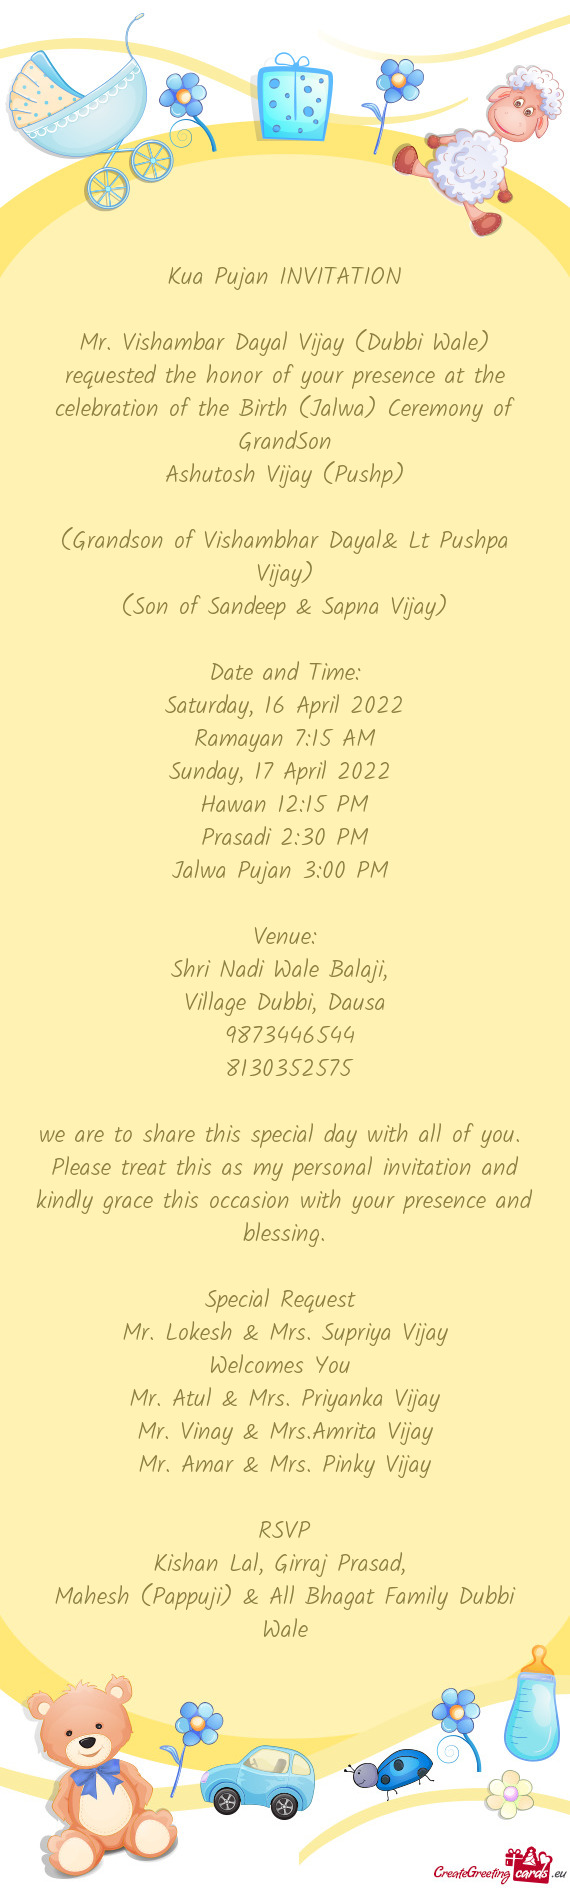 Mr. Vishambar Dayal Vijay (Dubbi Wale) requested the honor of your presence at the celebration of th